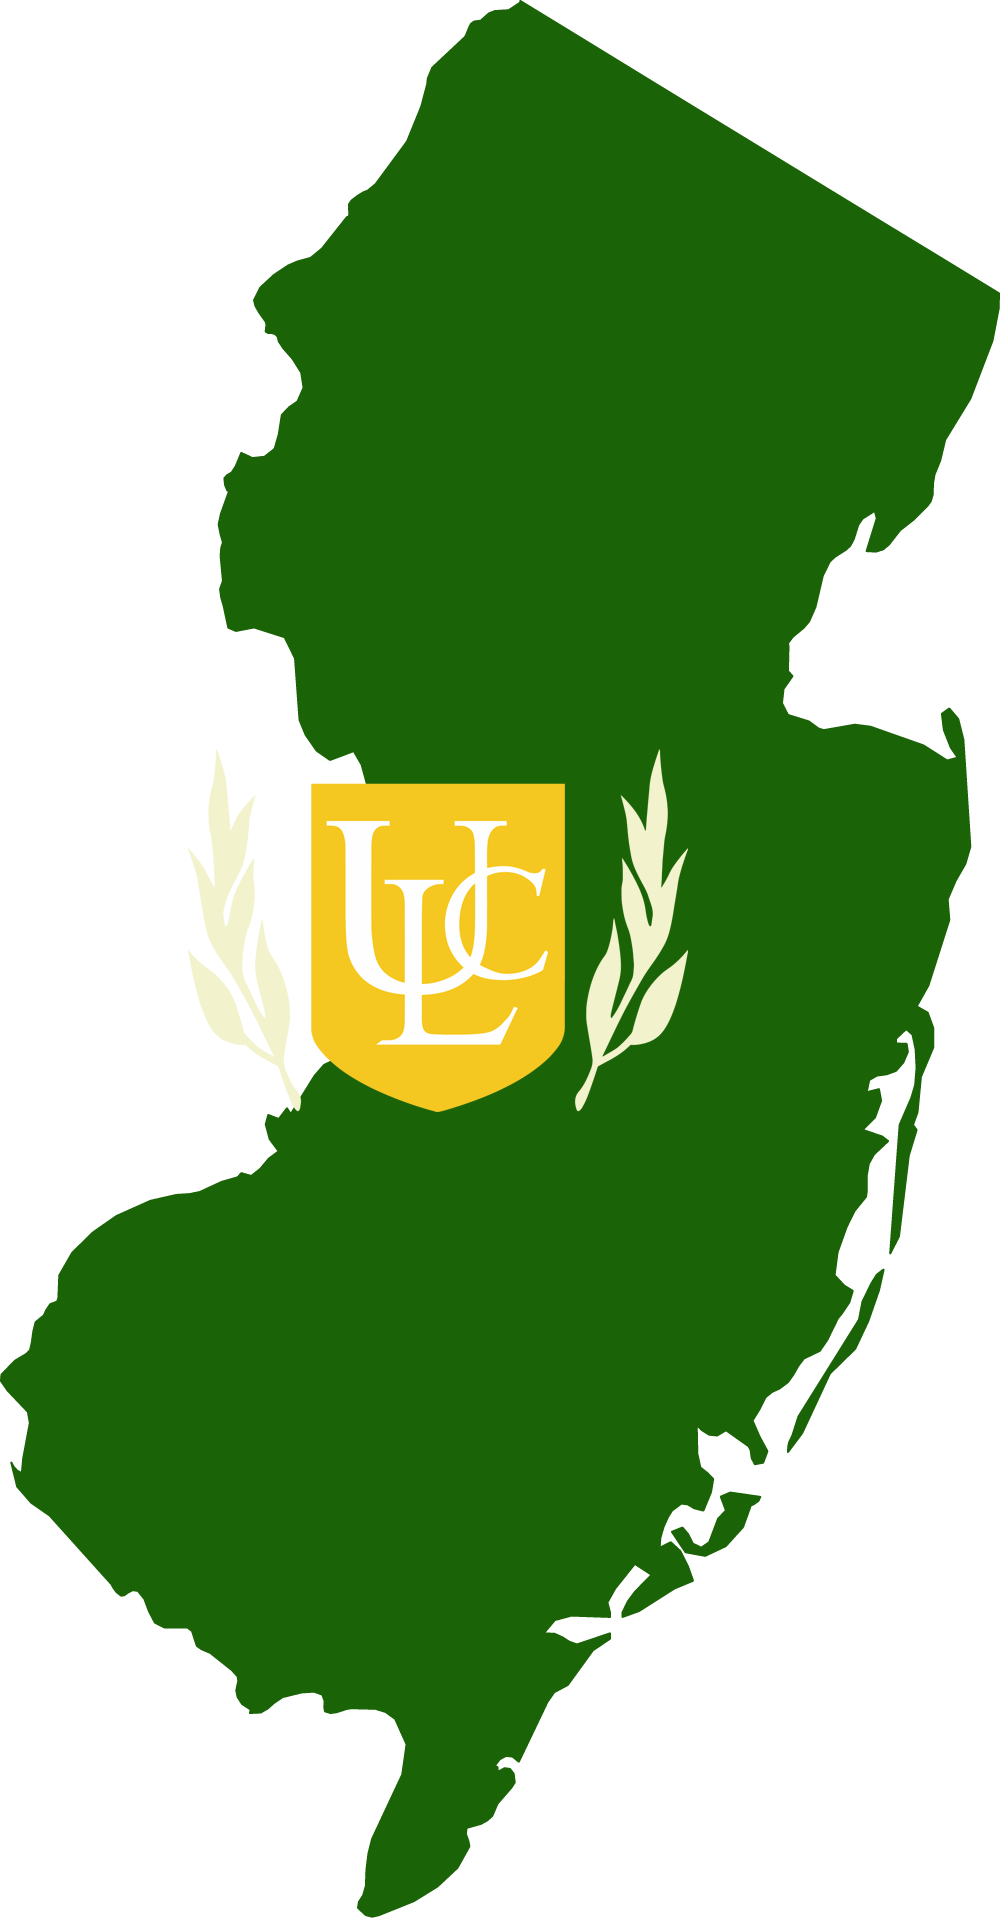 An outline of NJ with the ULC logo